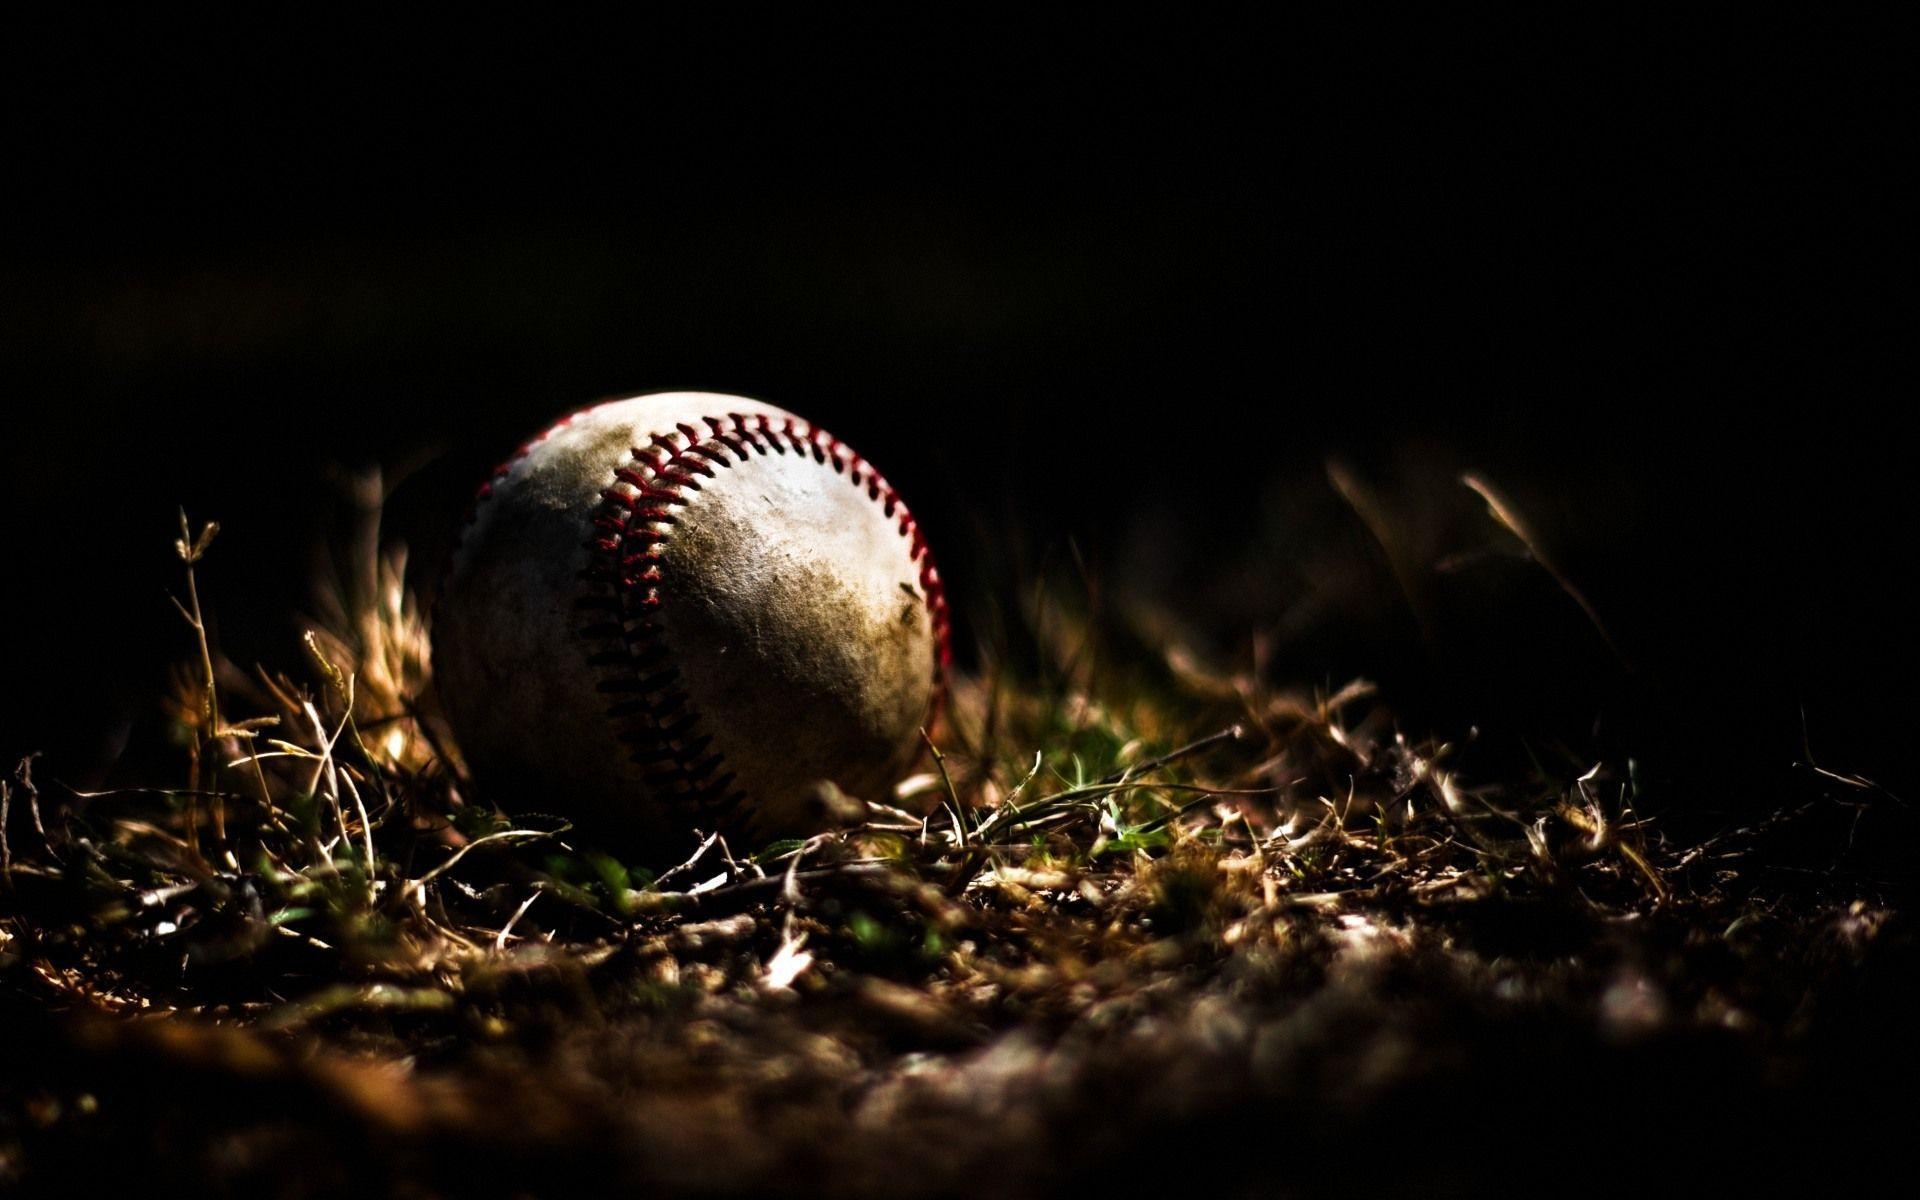 Check out this fantastic collection of cool baseball wallpapers, with 52 co...